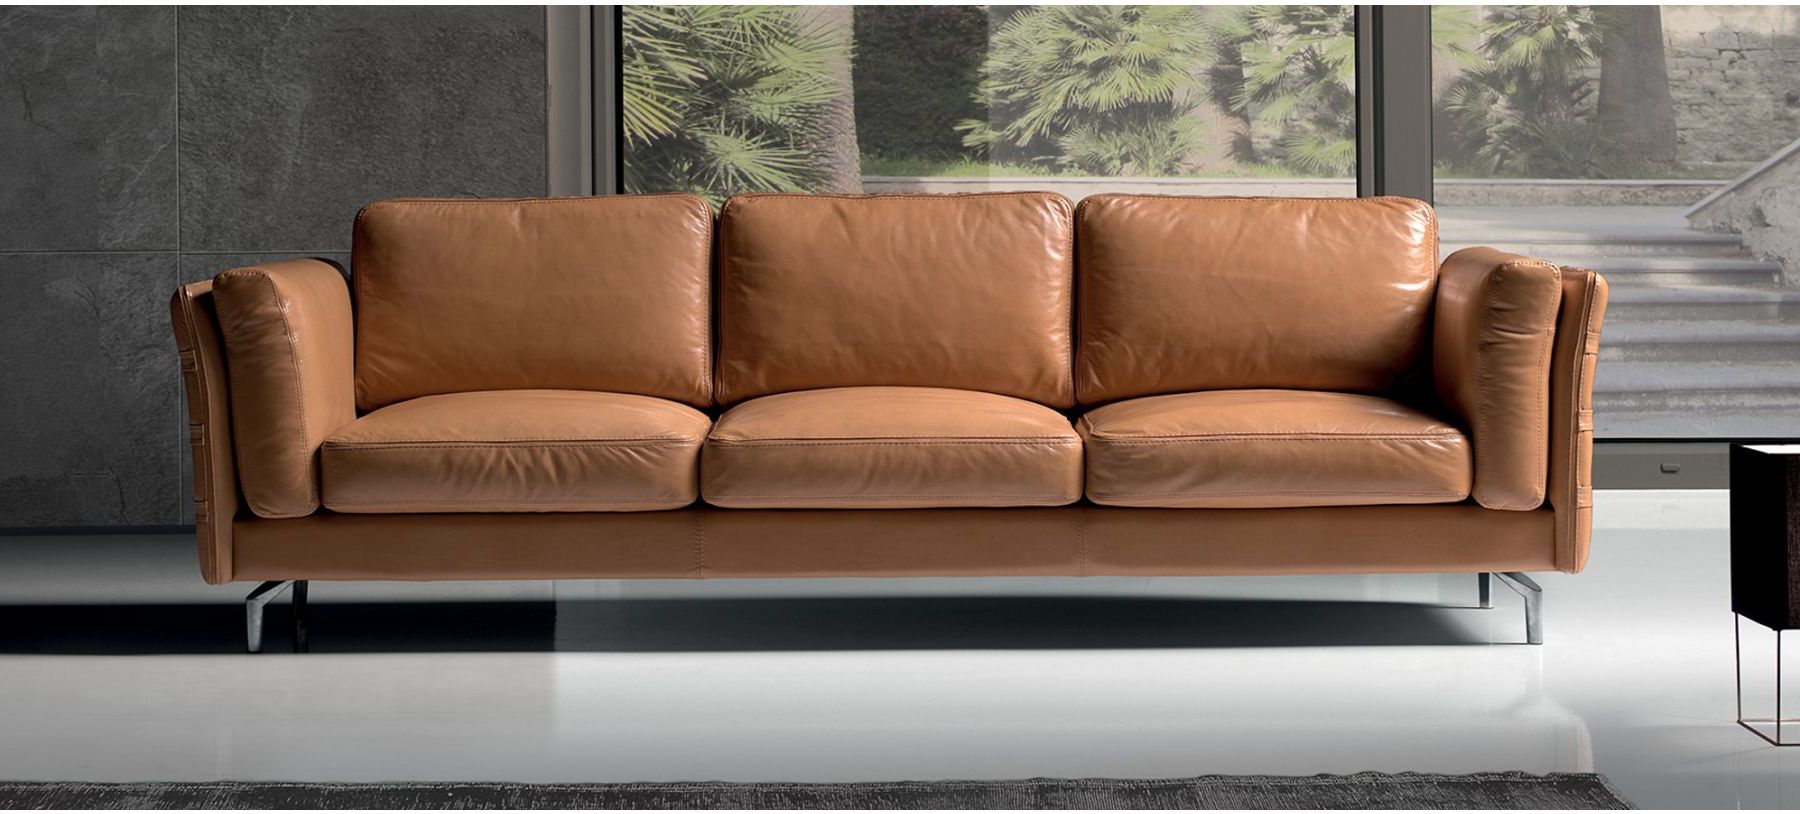 Jenny Leather Tan 3 + 2 Sofa Set With Chrome Legs Newtrend Available In A  Range Of Leathers And Colours 10 Yr Frame 10 Yr Pocket Sprung 5 Yr Foam  Warranty | Leather Sofa World Intended For Chrome Metal Legs Sofas (Gallery 13 of 20)